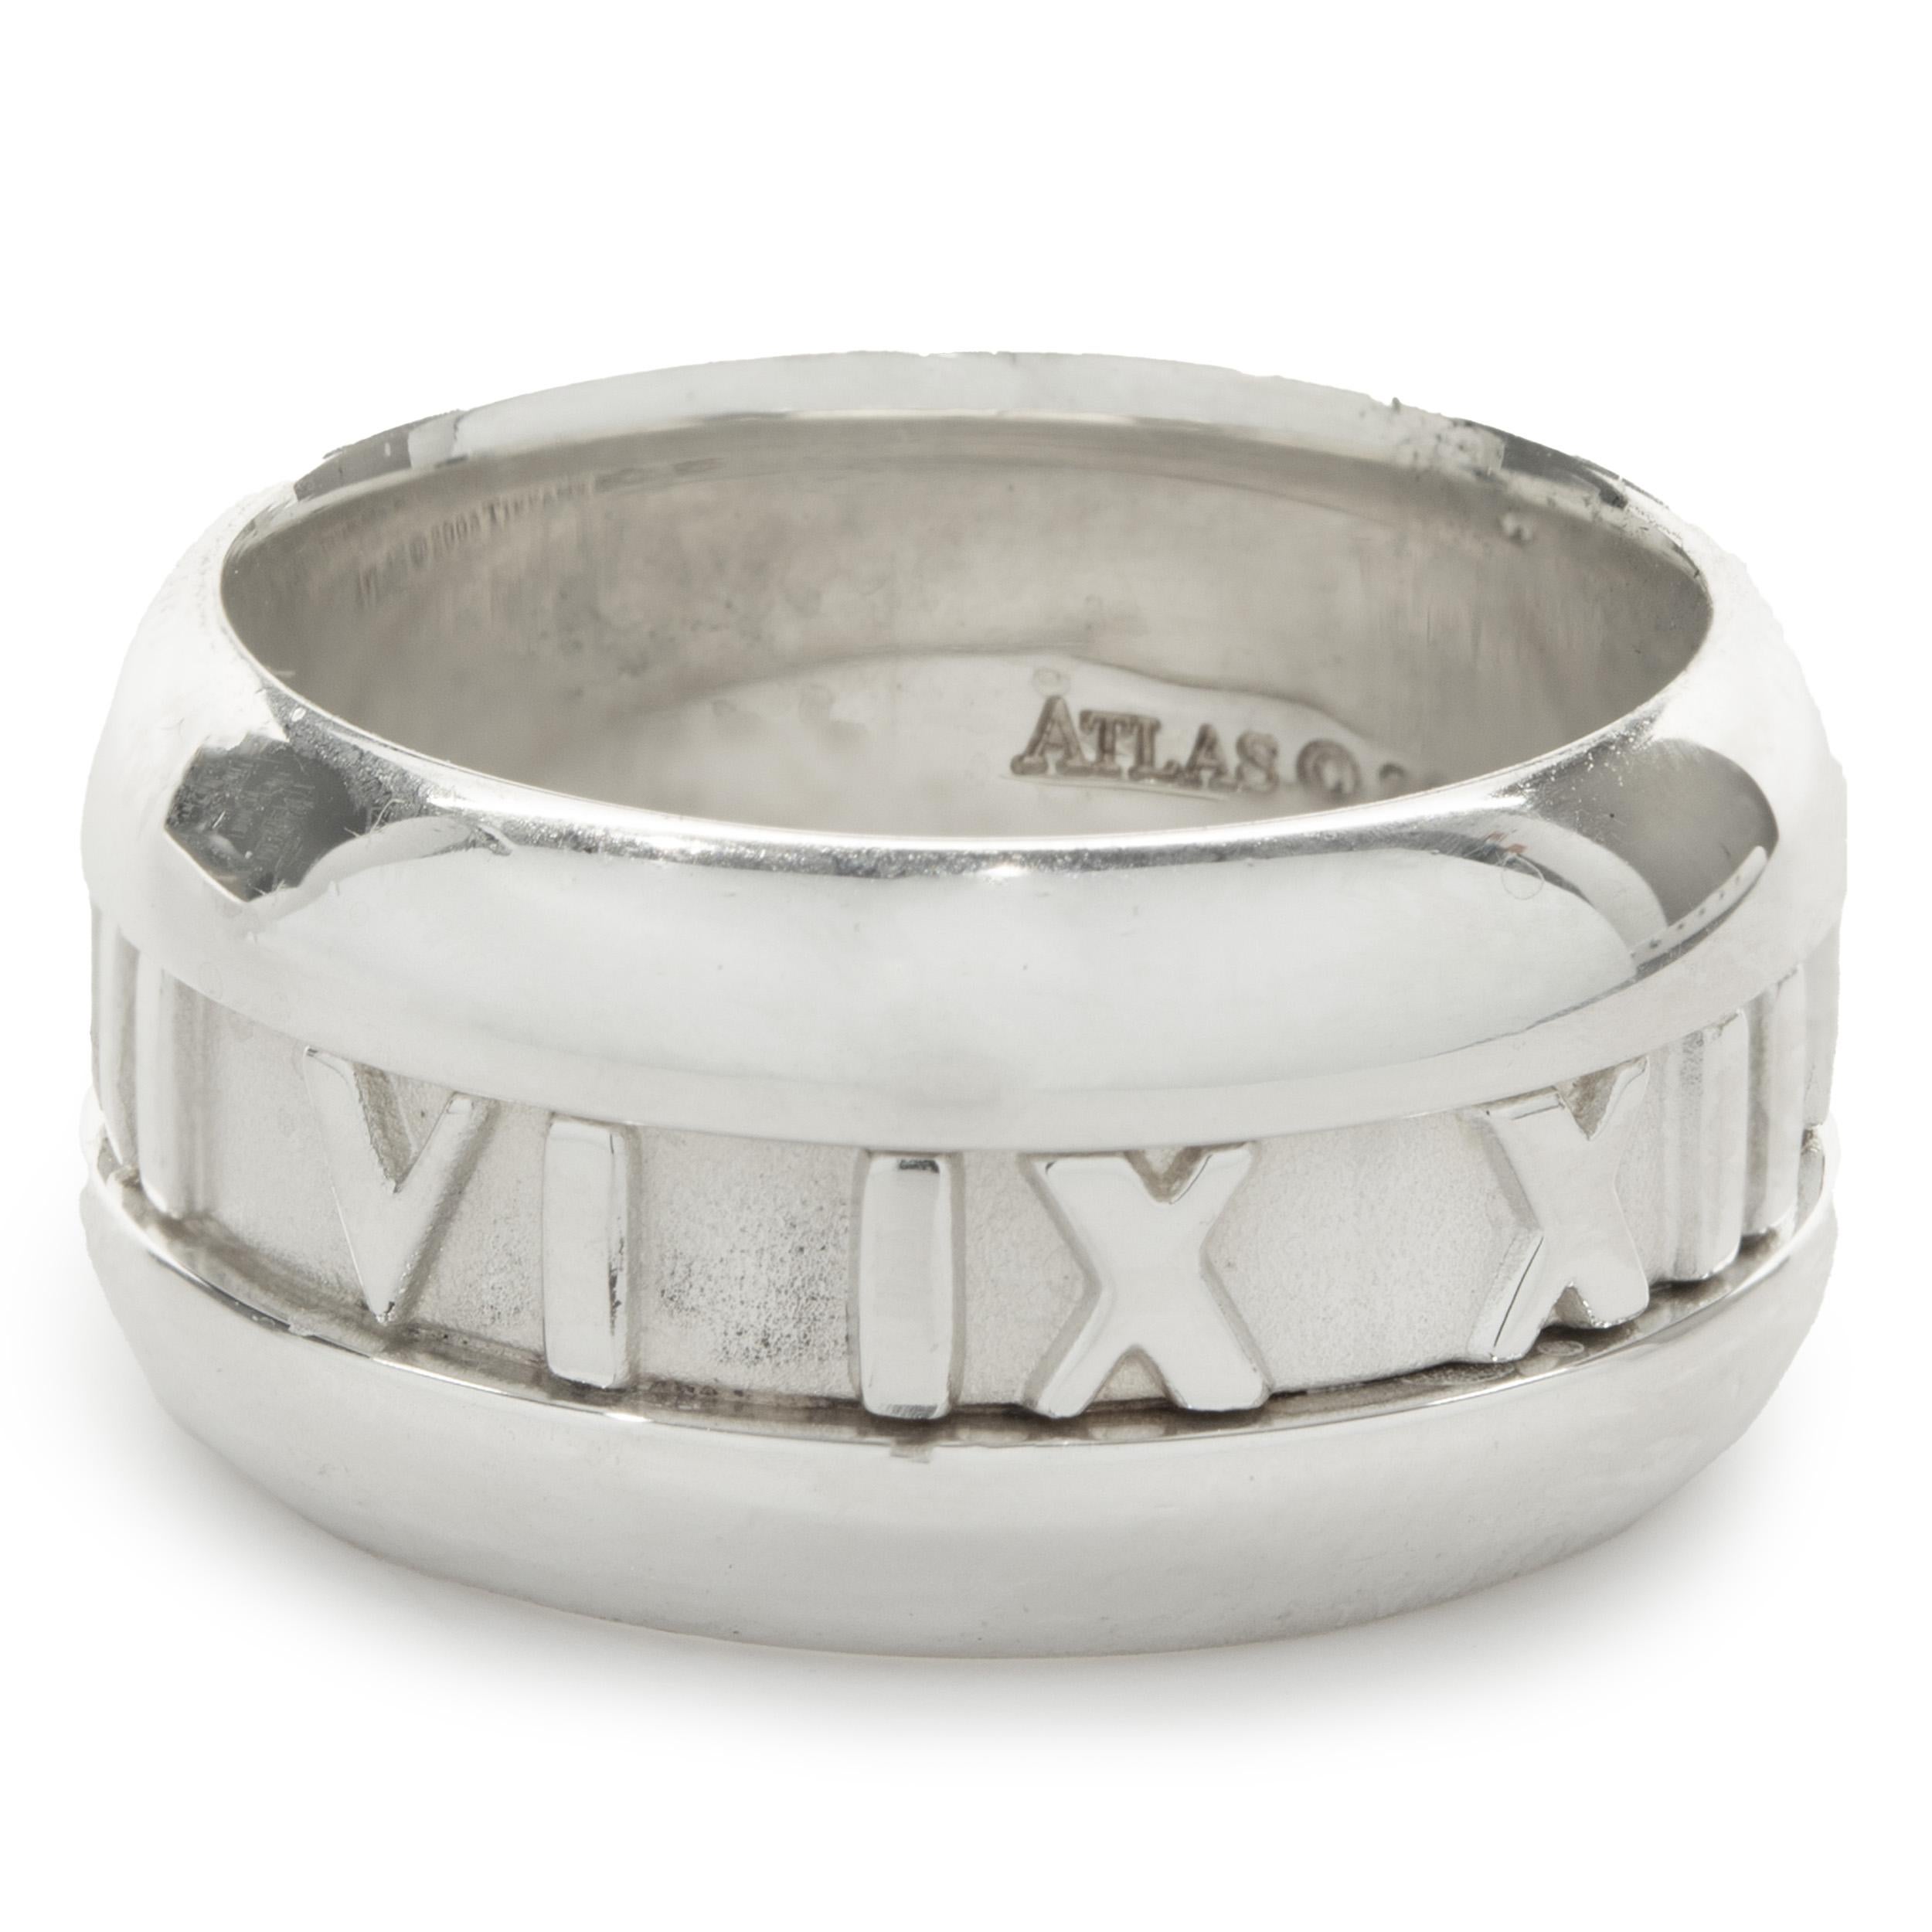 Designer: Tiffany & Co. 
Material: sterling silver
Size: 5.5
Dimensions: ring top measures 9.5mm wide
Weight: 7.81 grams